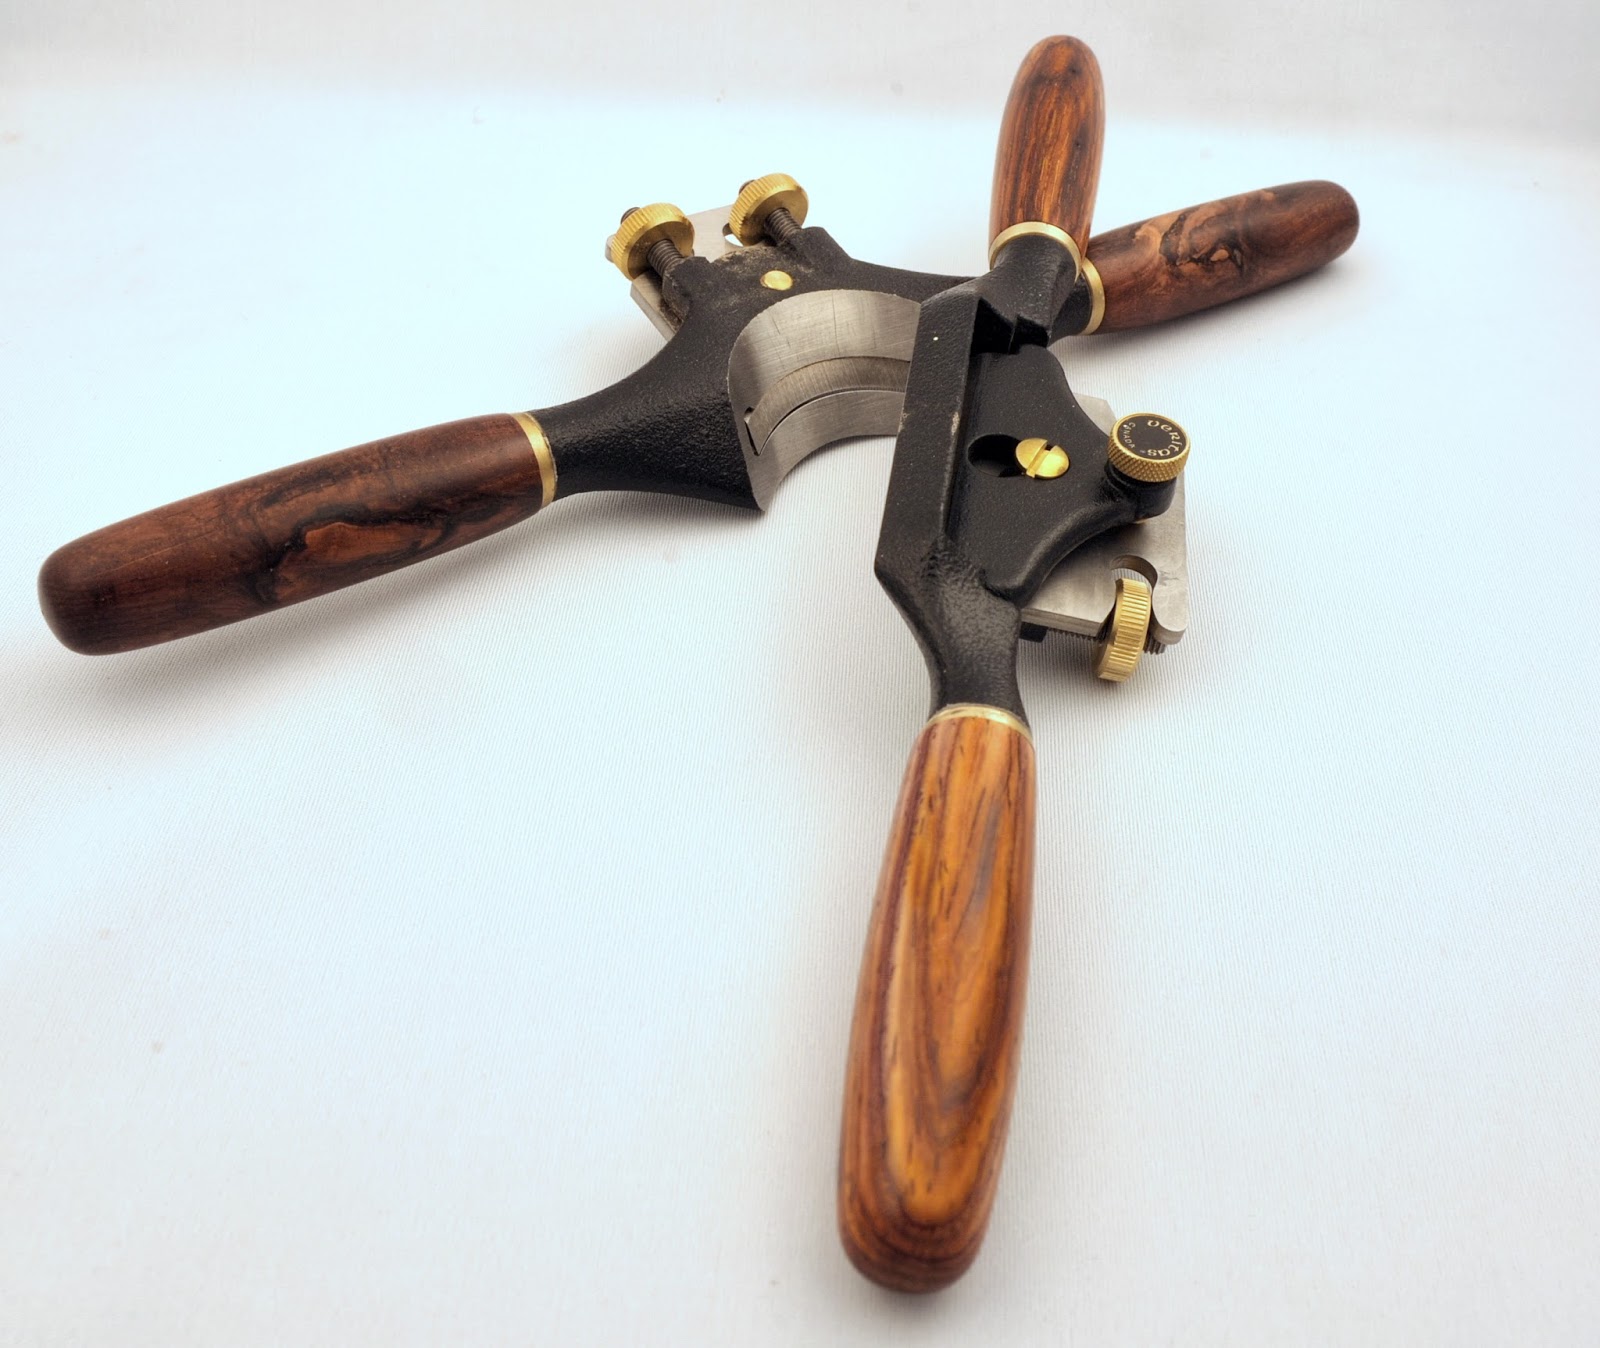 Rich's Woodcraft: This is not just any plane hammer